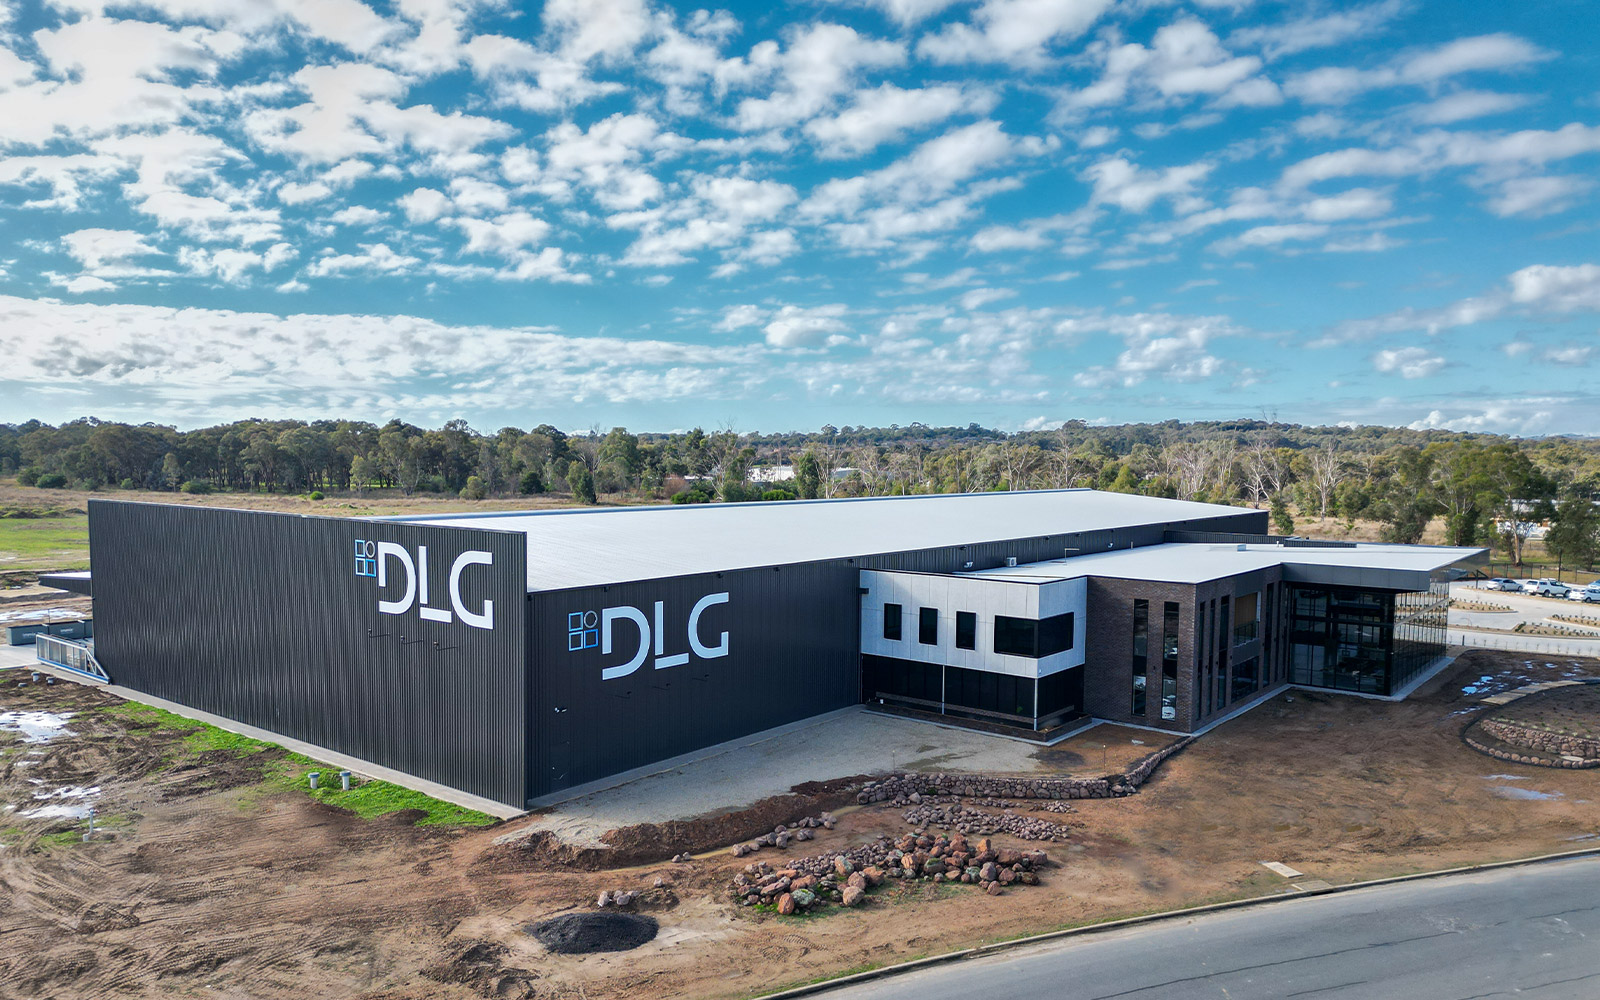 DLG Aluminum and Glazing combined office and manufacturing building